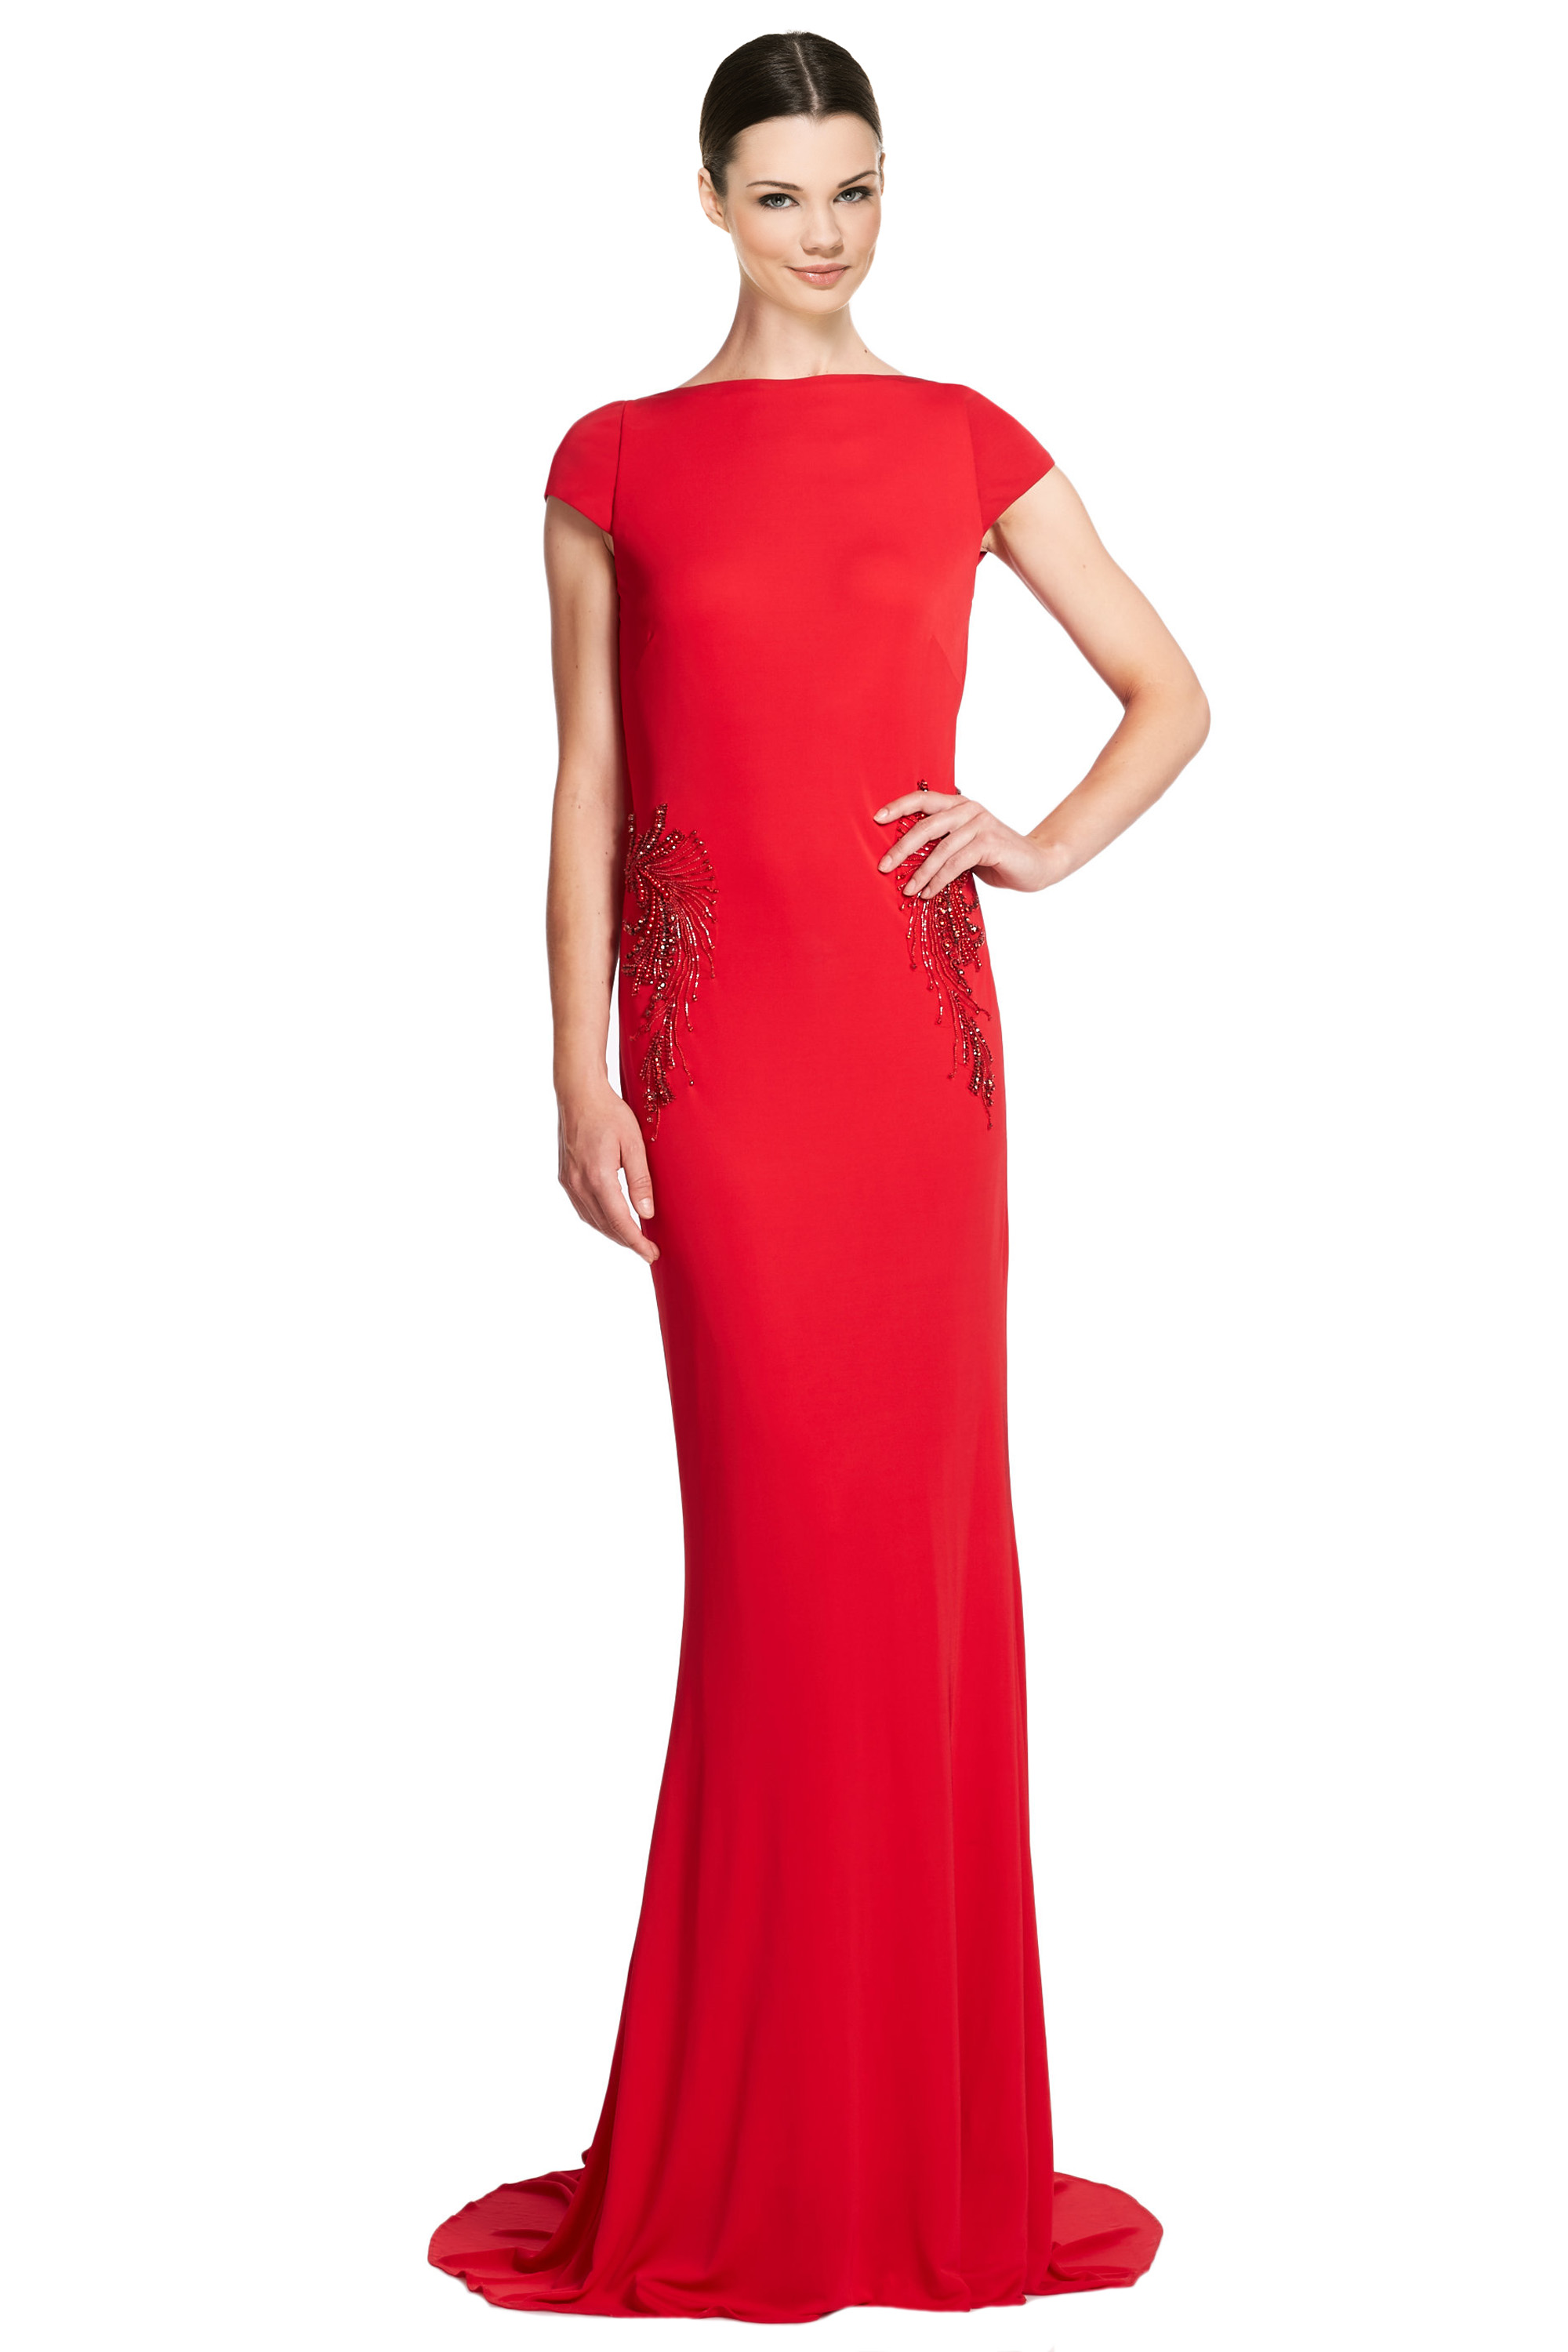 Badgley Mischka Beaded Draped Back Jersey Evening Gown Dress - image 1 of 3